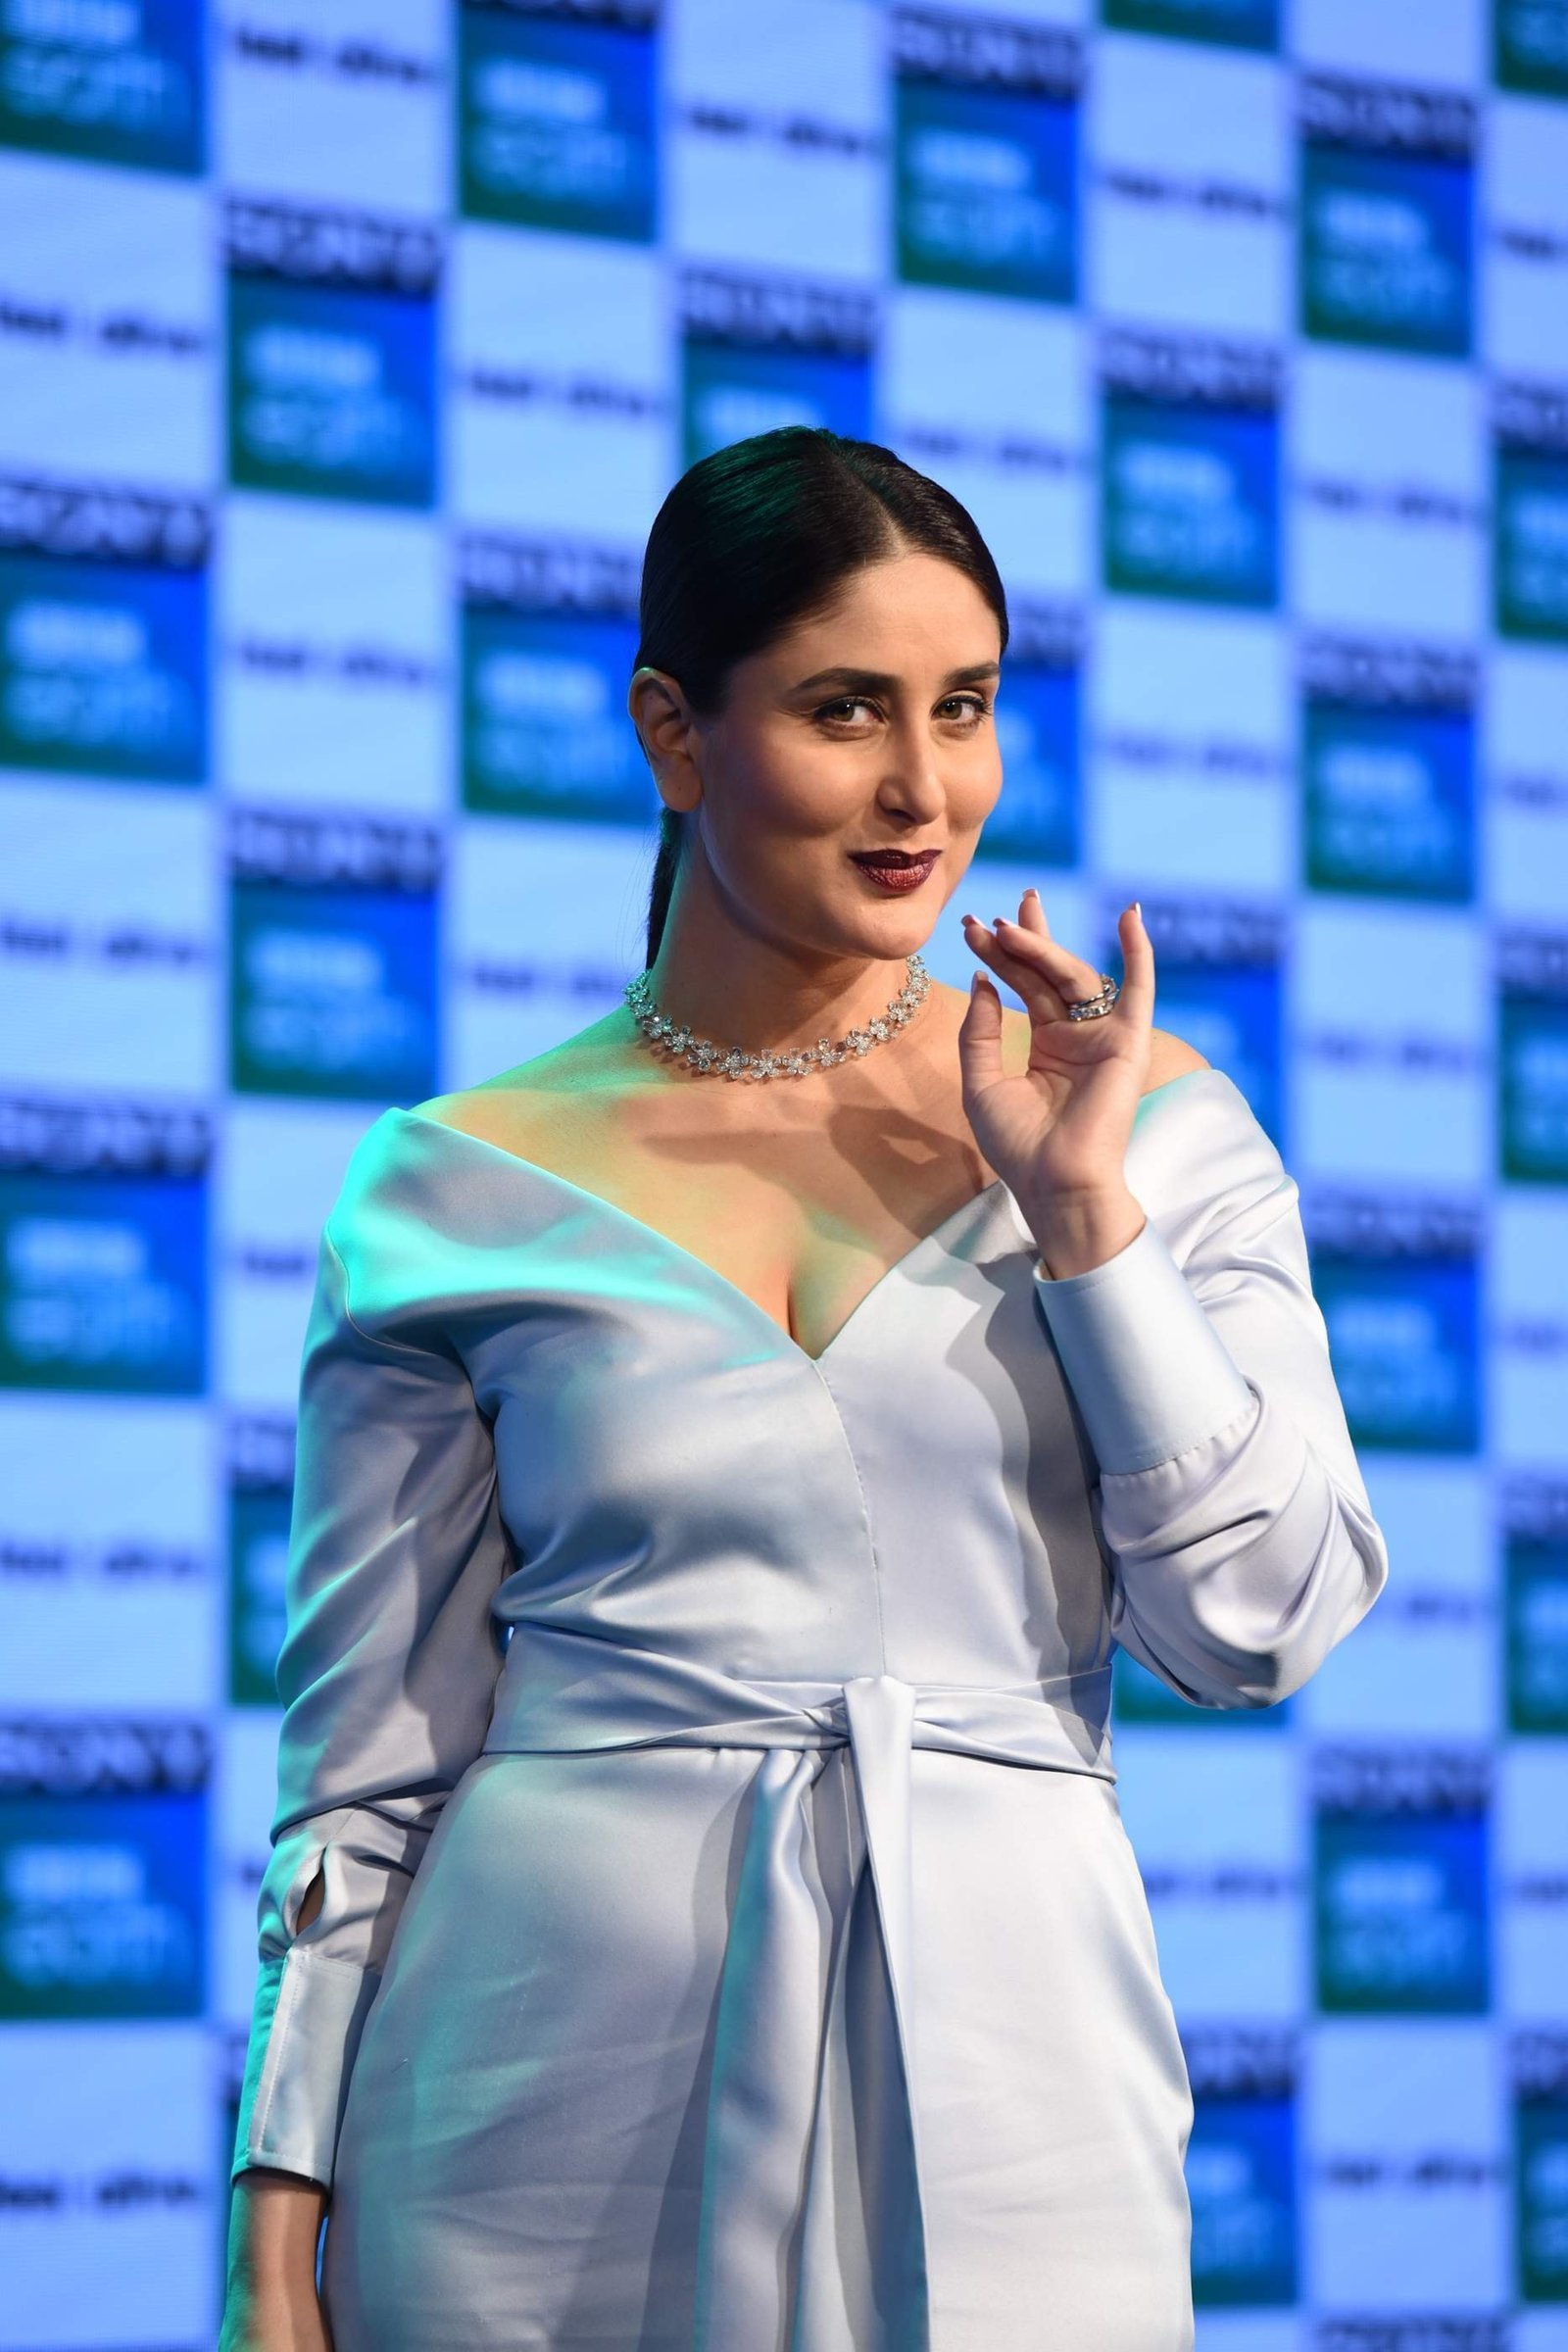 Kareena Kapoor Khan during the launch of a new channel Sony BBC Earth Images | Picture 1477748